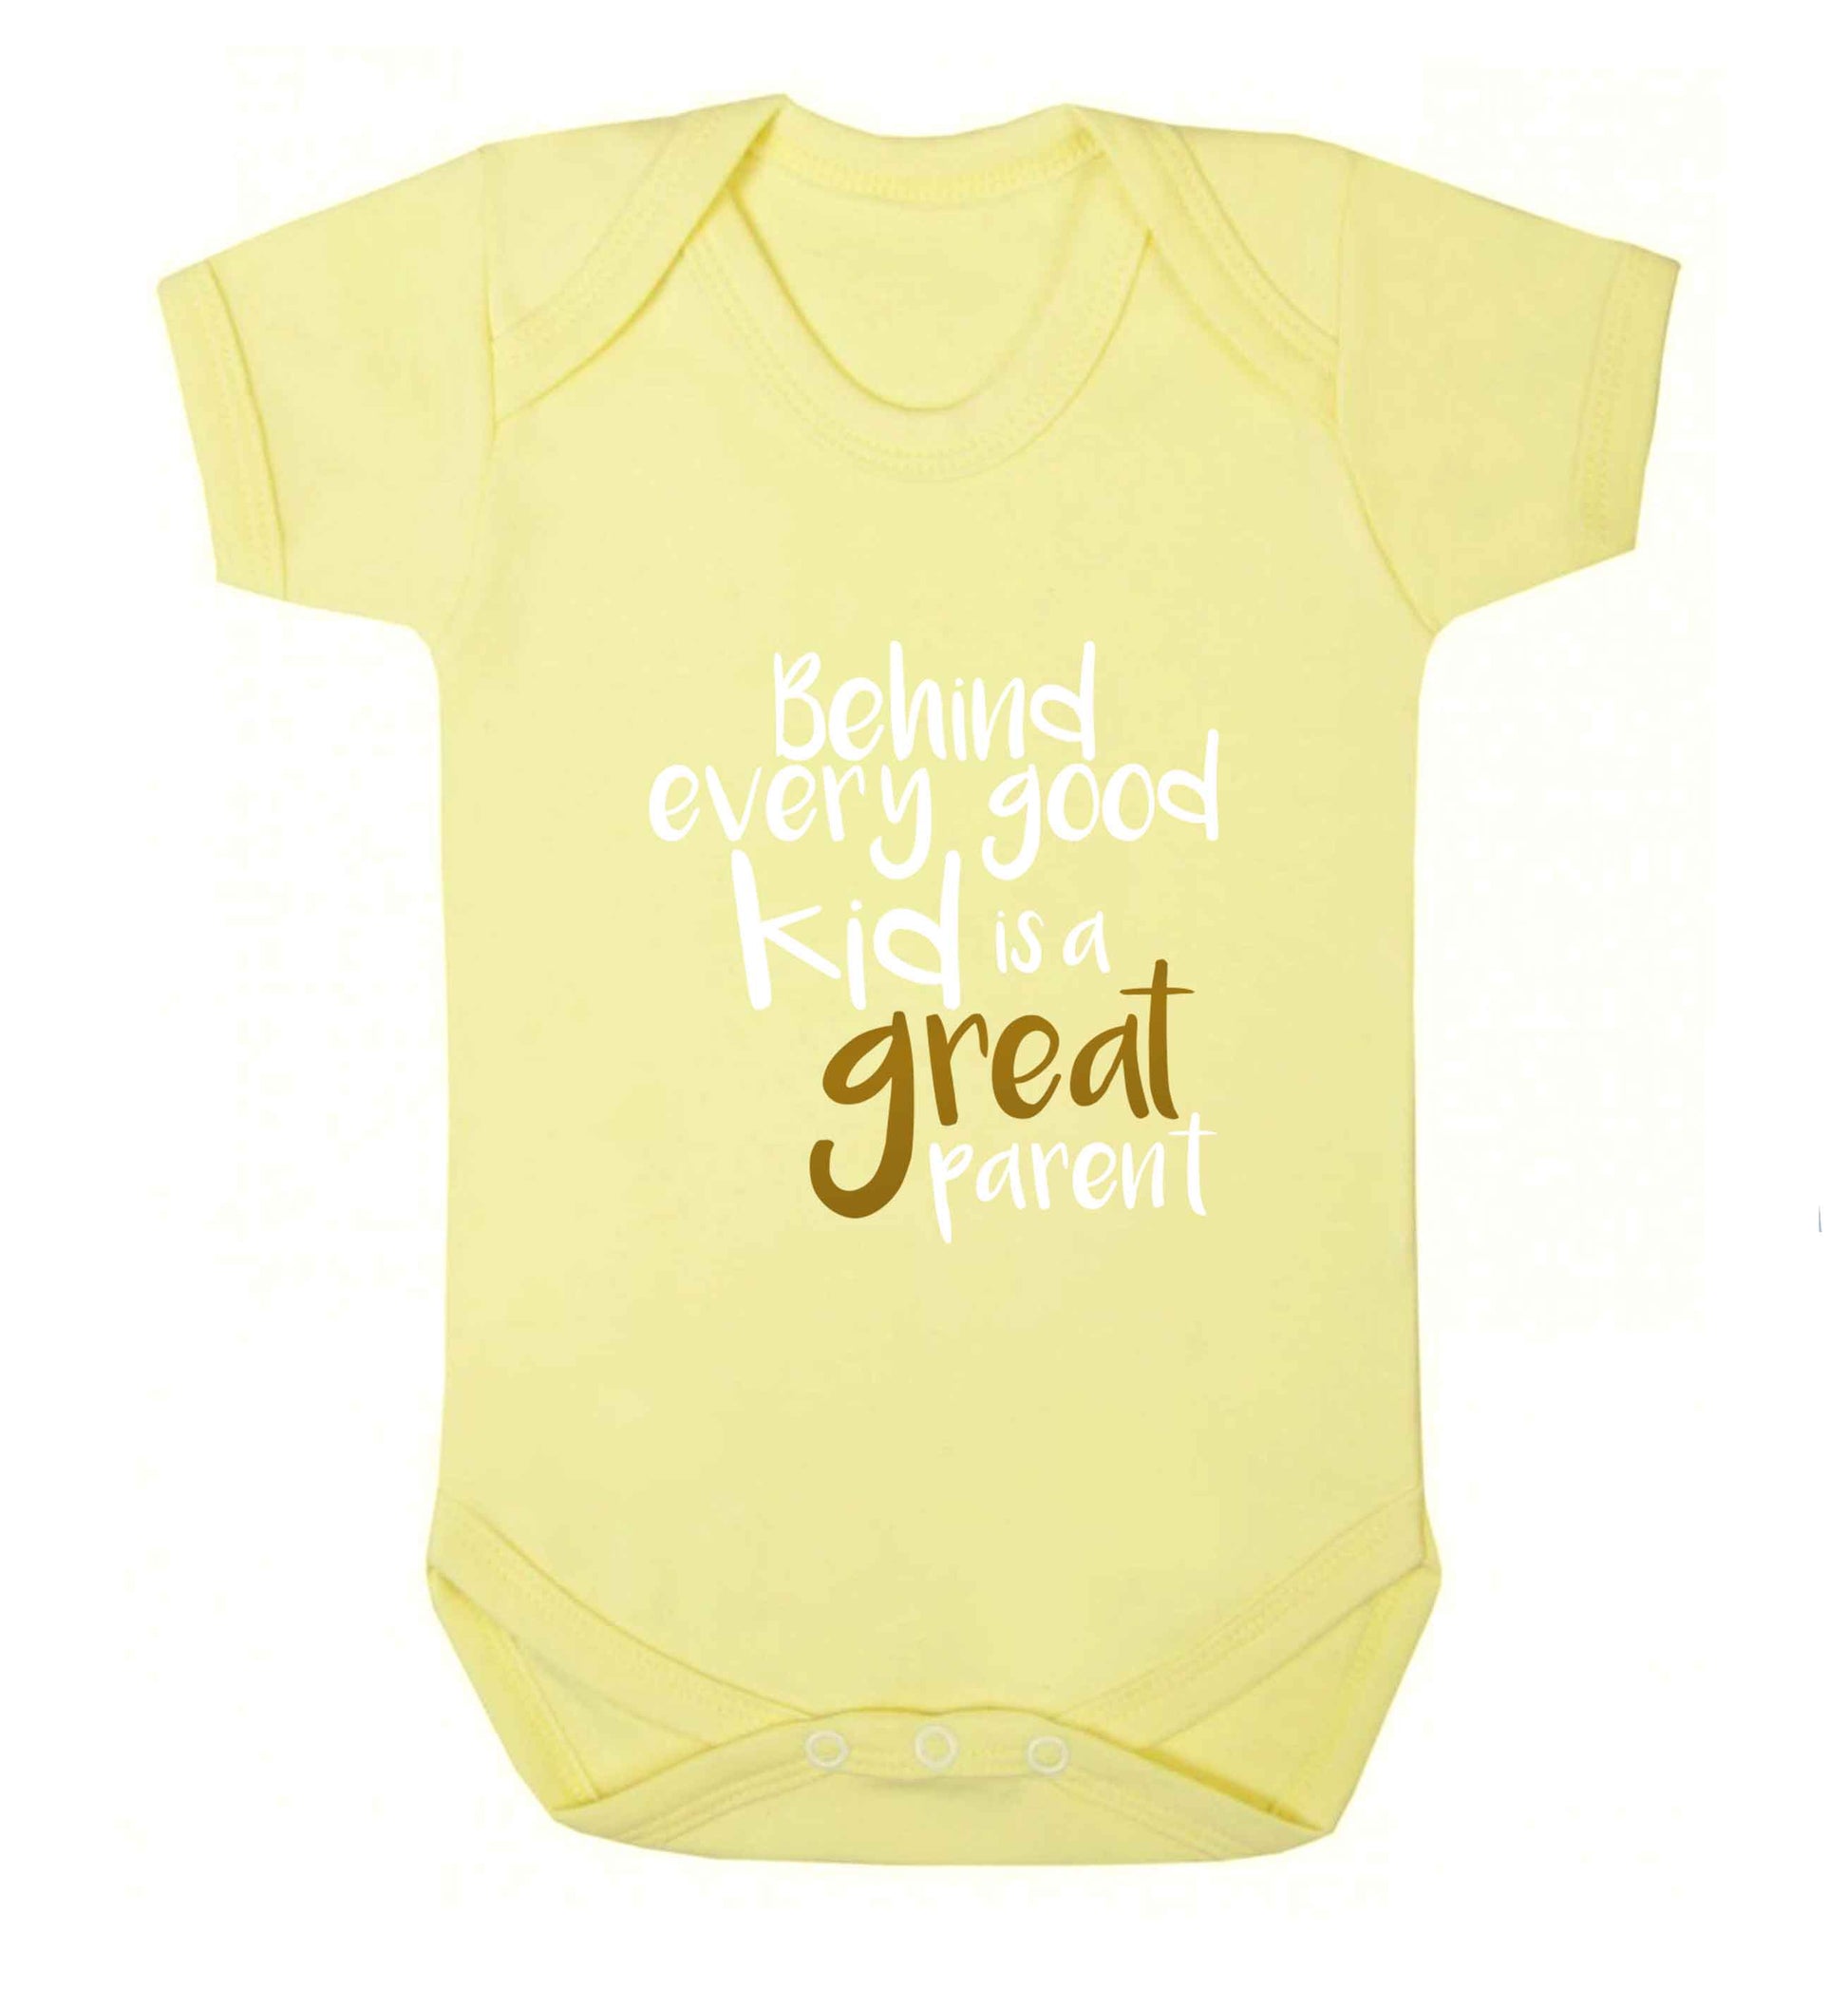 Behind every good kid is a great parent baby vest pale yellow 18-24 months